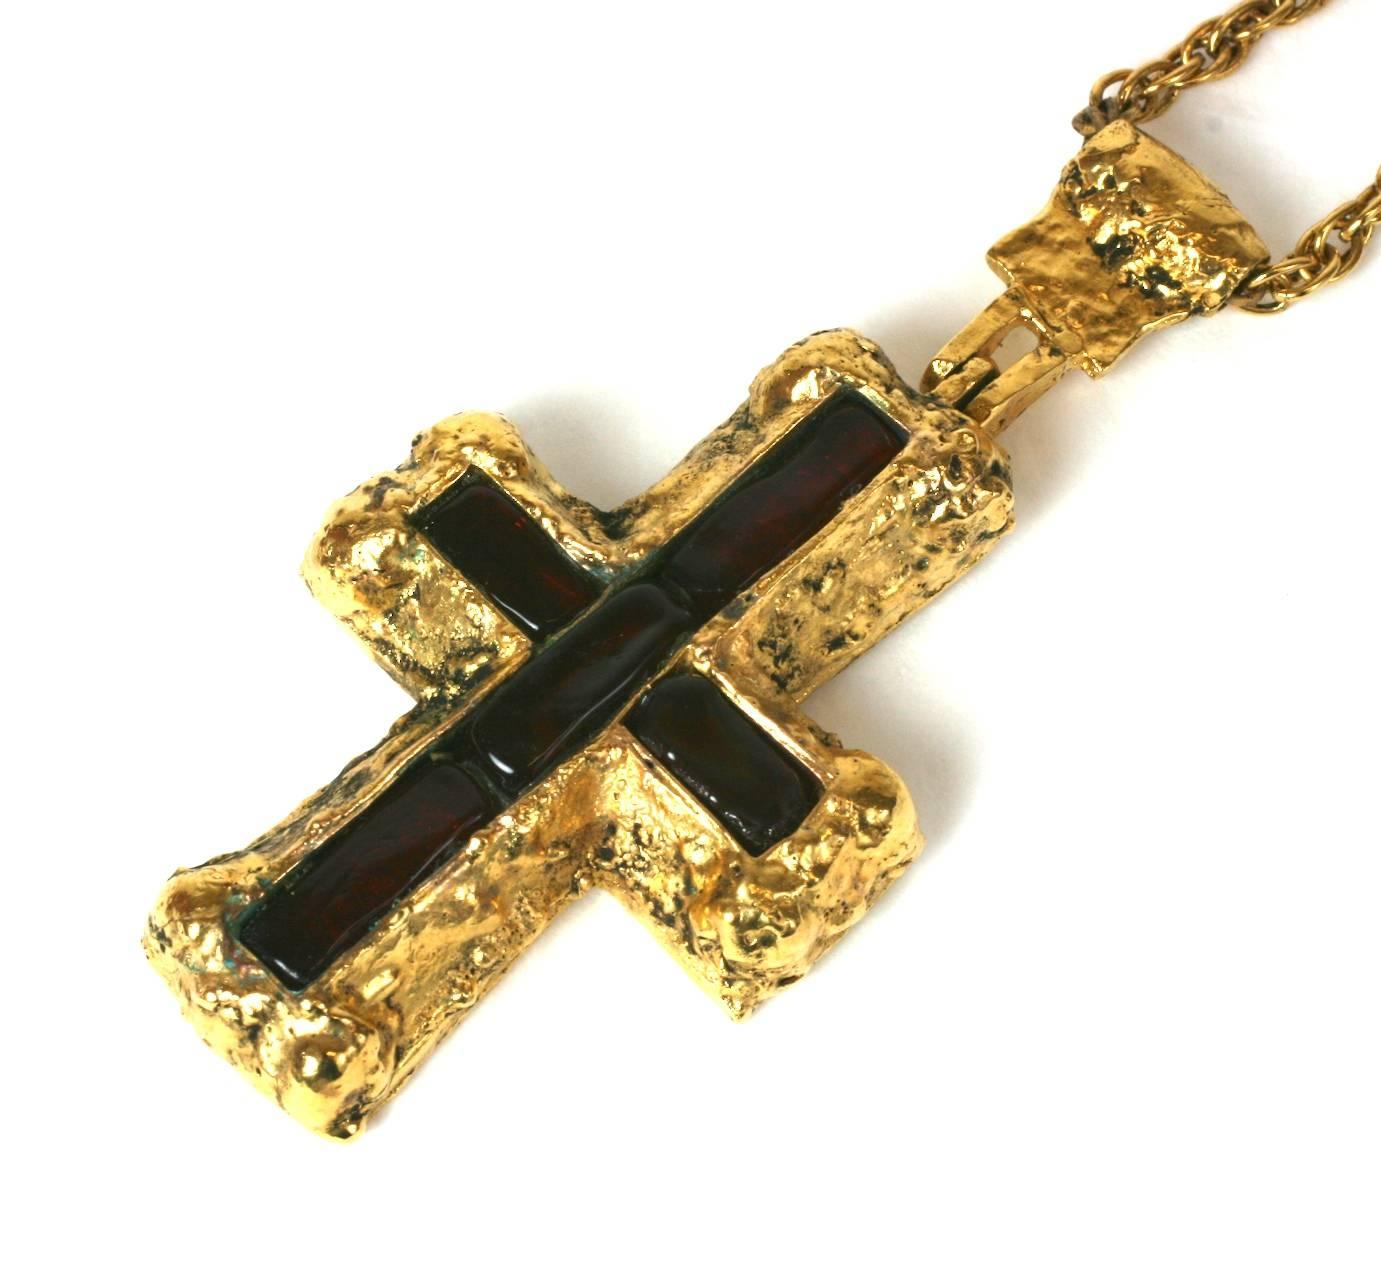 Women's Important CoCo Chanel Personal Medieval Cruciform Pendant Necklace